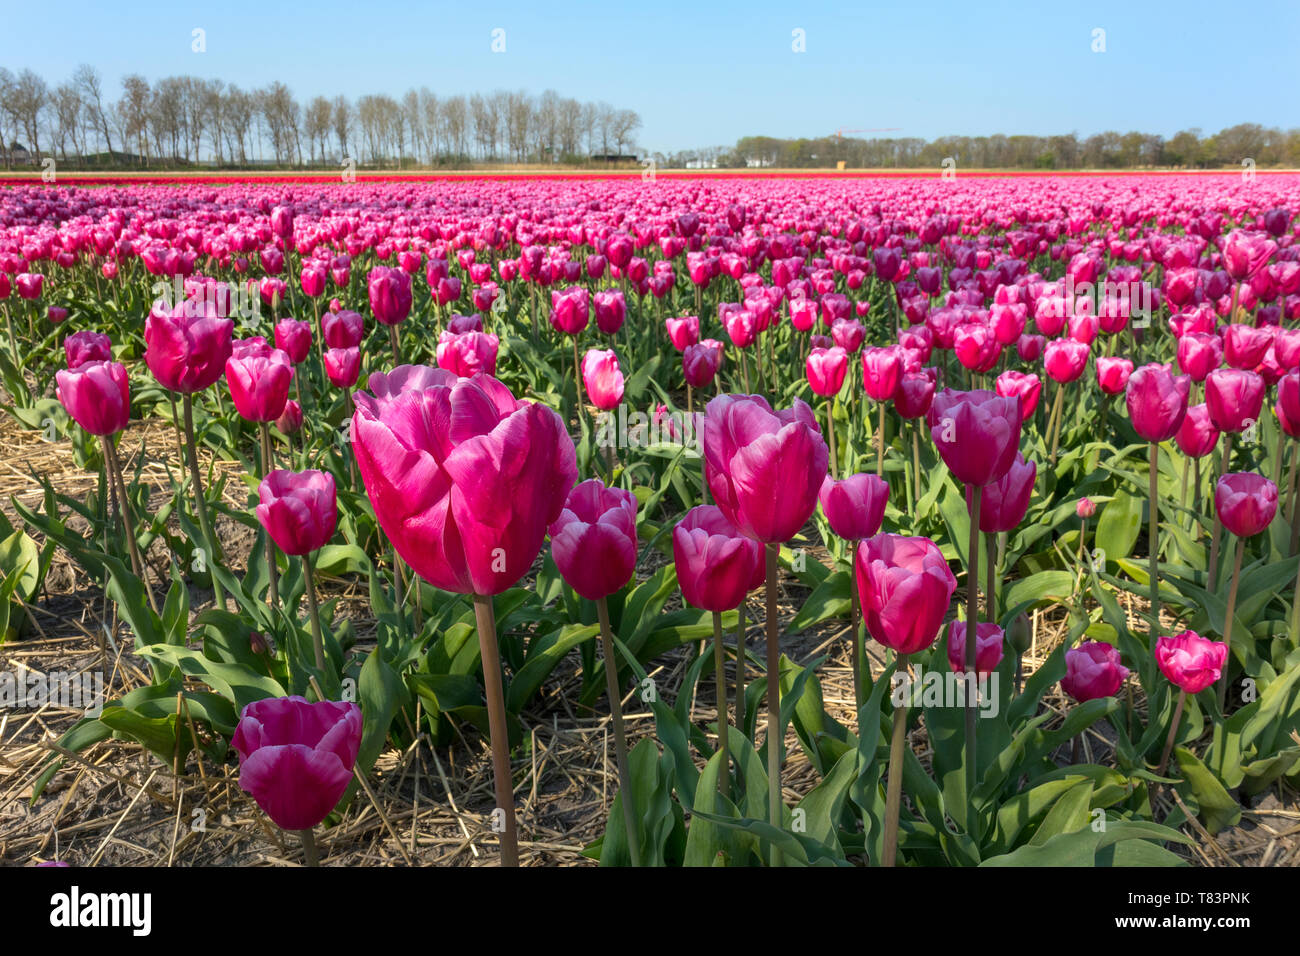 Lisse, Holland - April 18, 2019: Traditional Dutch tulip field with rows of pink flowers close up Stock Photo